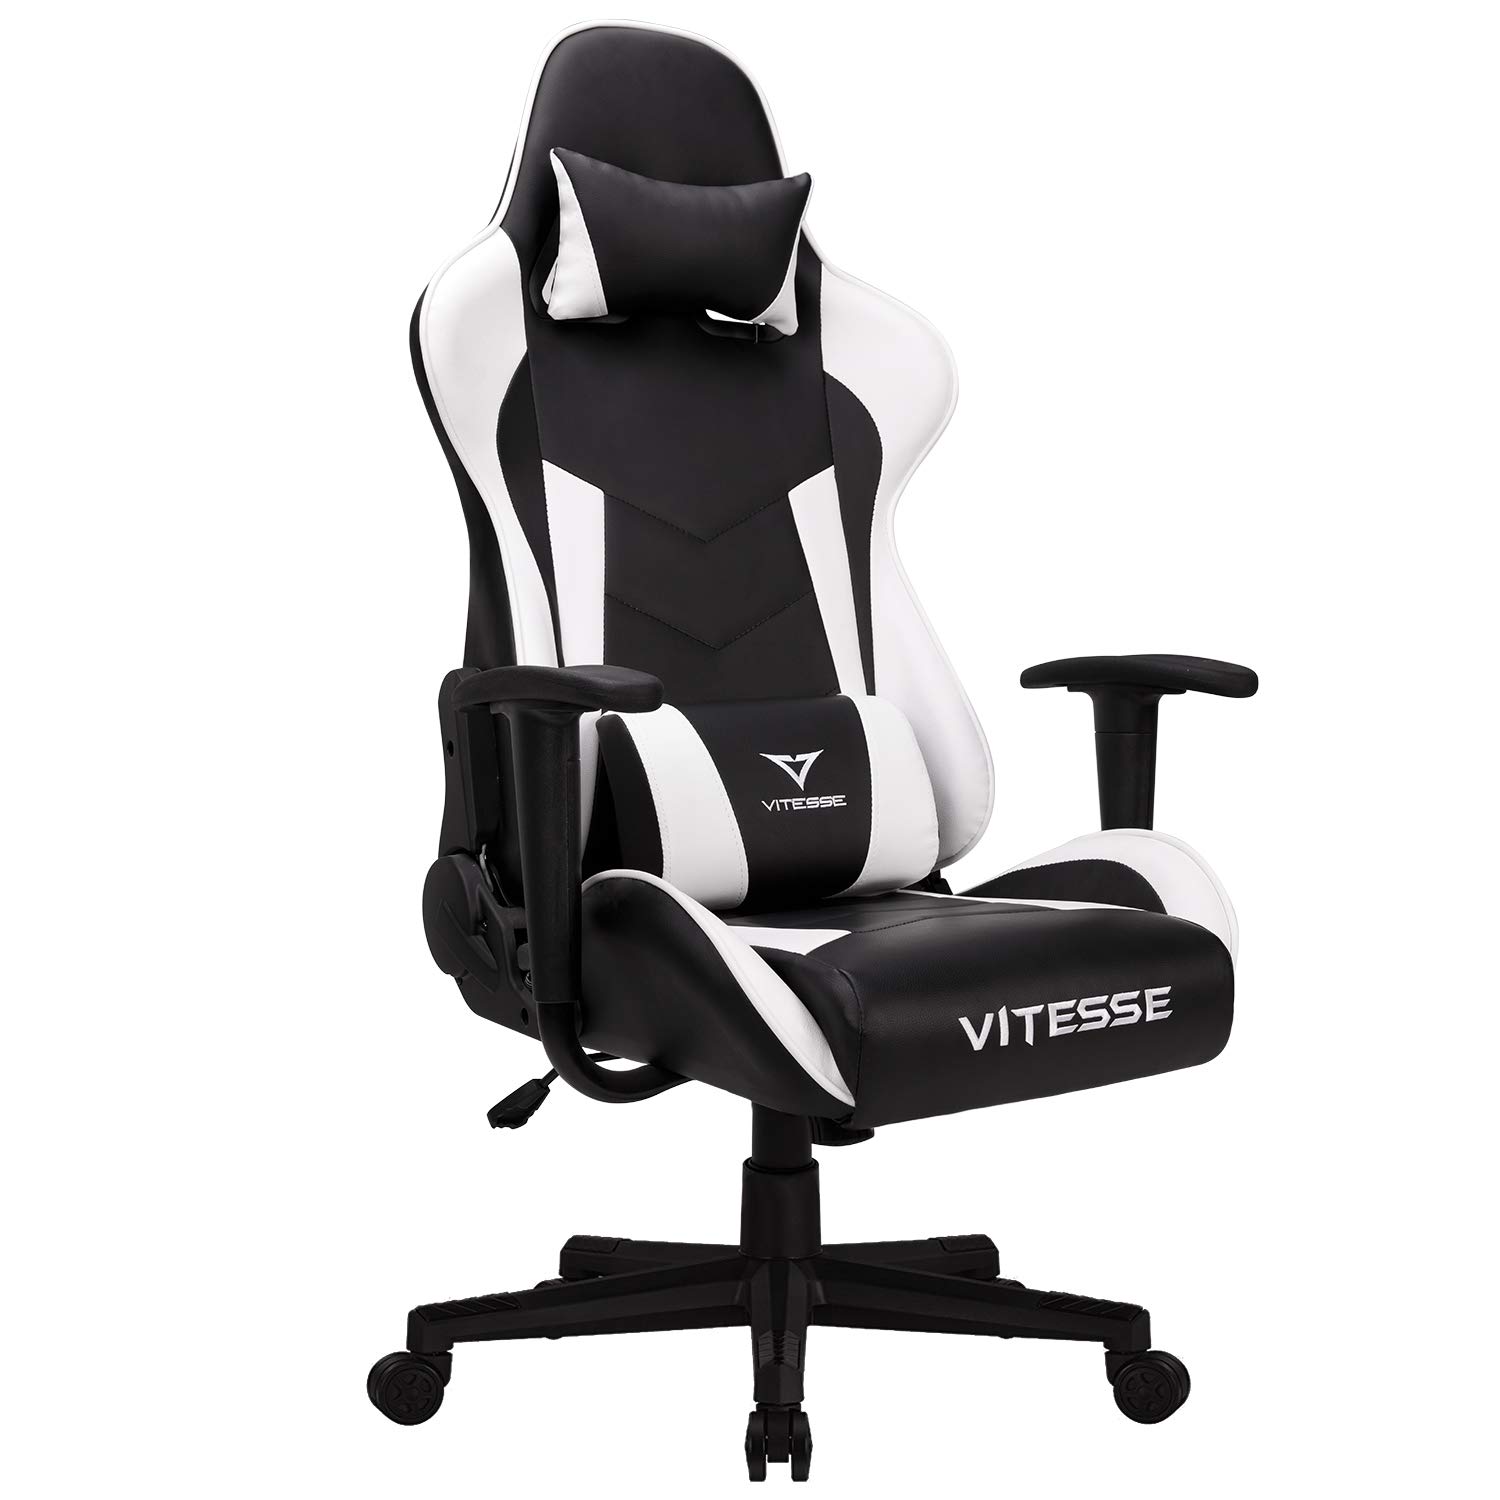 Gaming Office Chair Ergonomic Desk Chair High Back Racing Style Computer Chair Swivel Executive Leather Chair with Lumbar Support and Headrest (White)